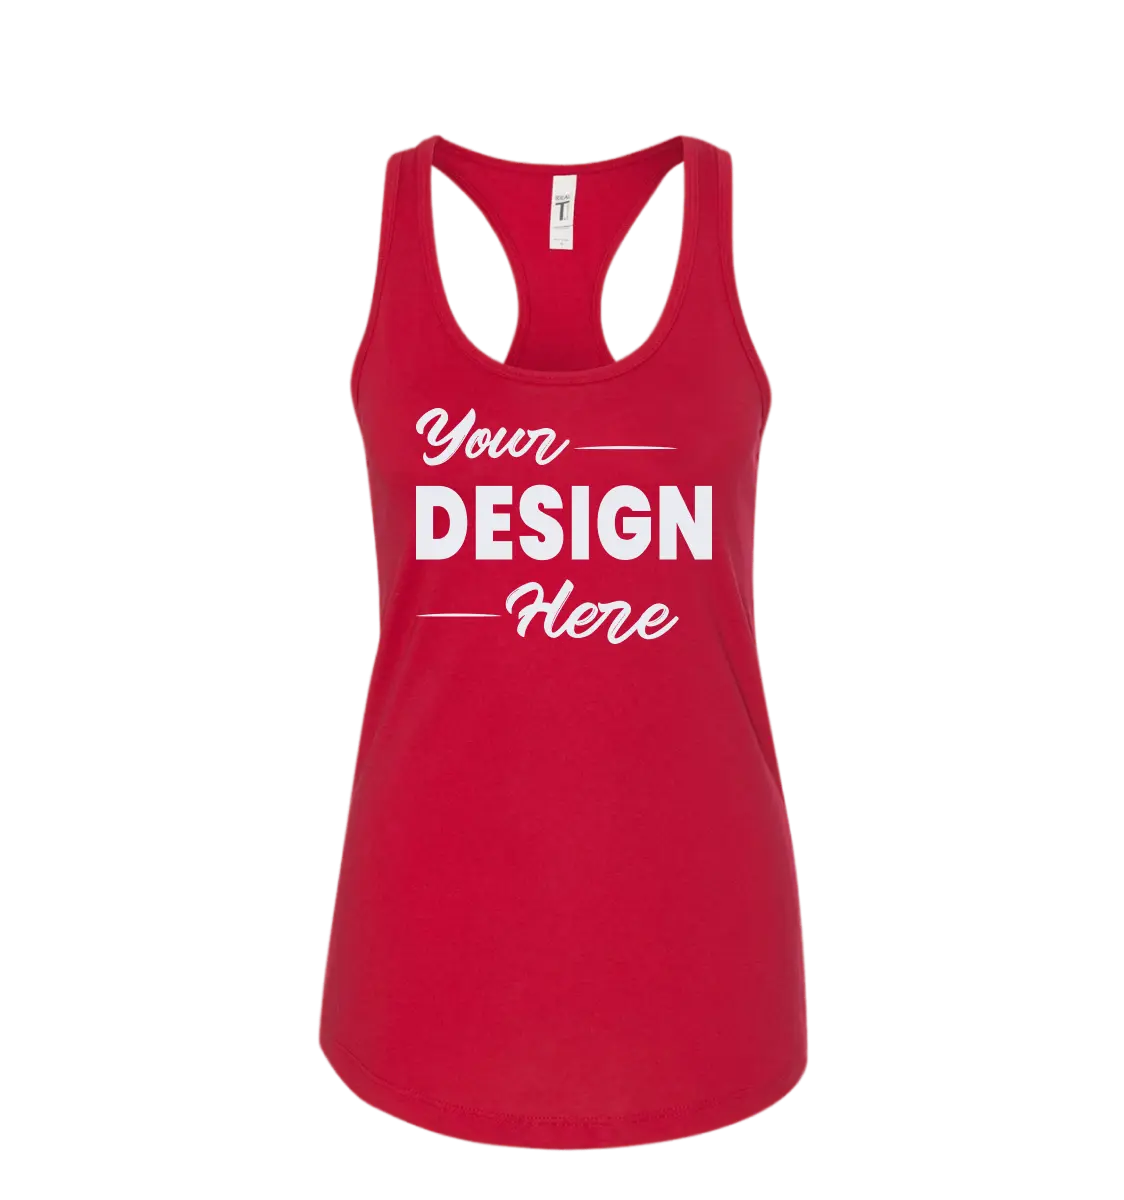 Red color women's tank top